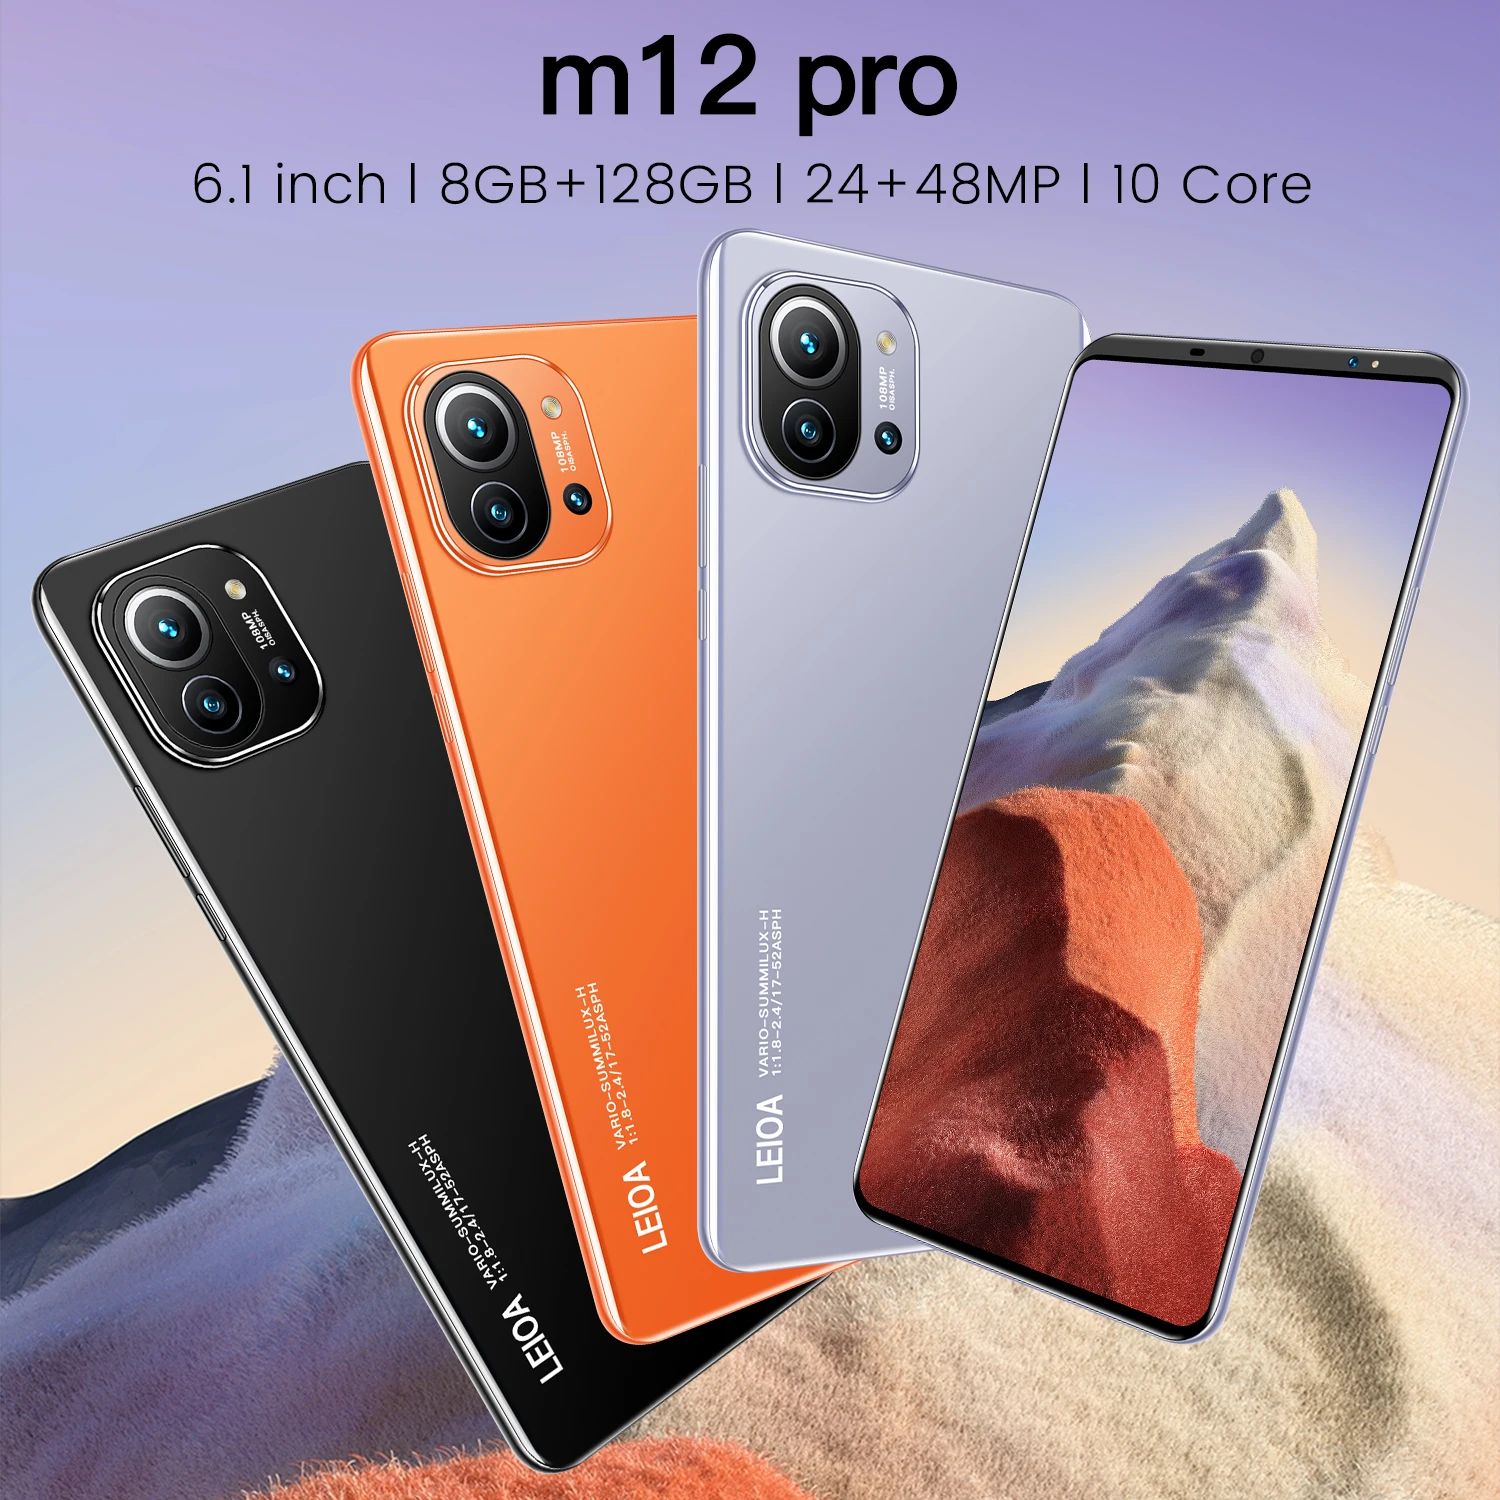 cheapest smart phone m12 pro 24mp48mp camera 8gb128gb 6 1 inch full screen smartphone 5000mah cell phone android fast shipping free global shipping